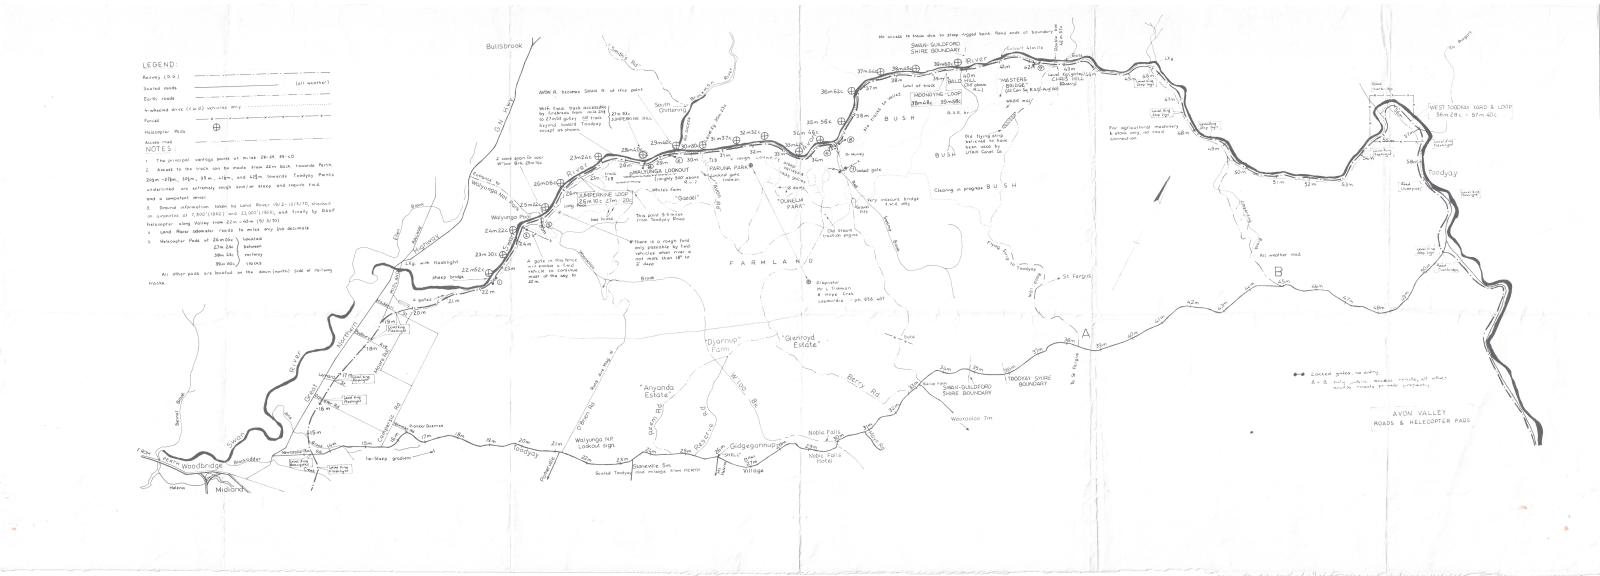 Avon Valley map showing roads and helicopter pads